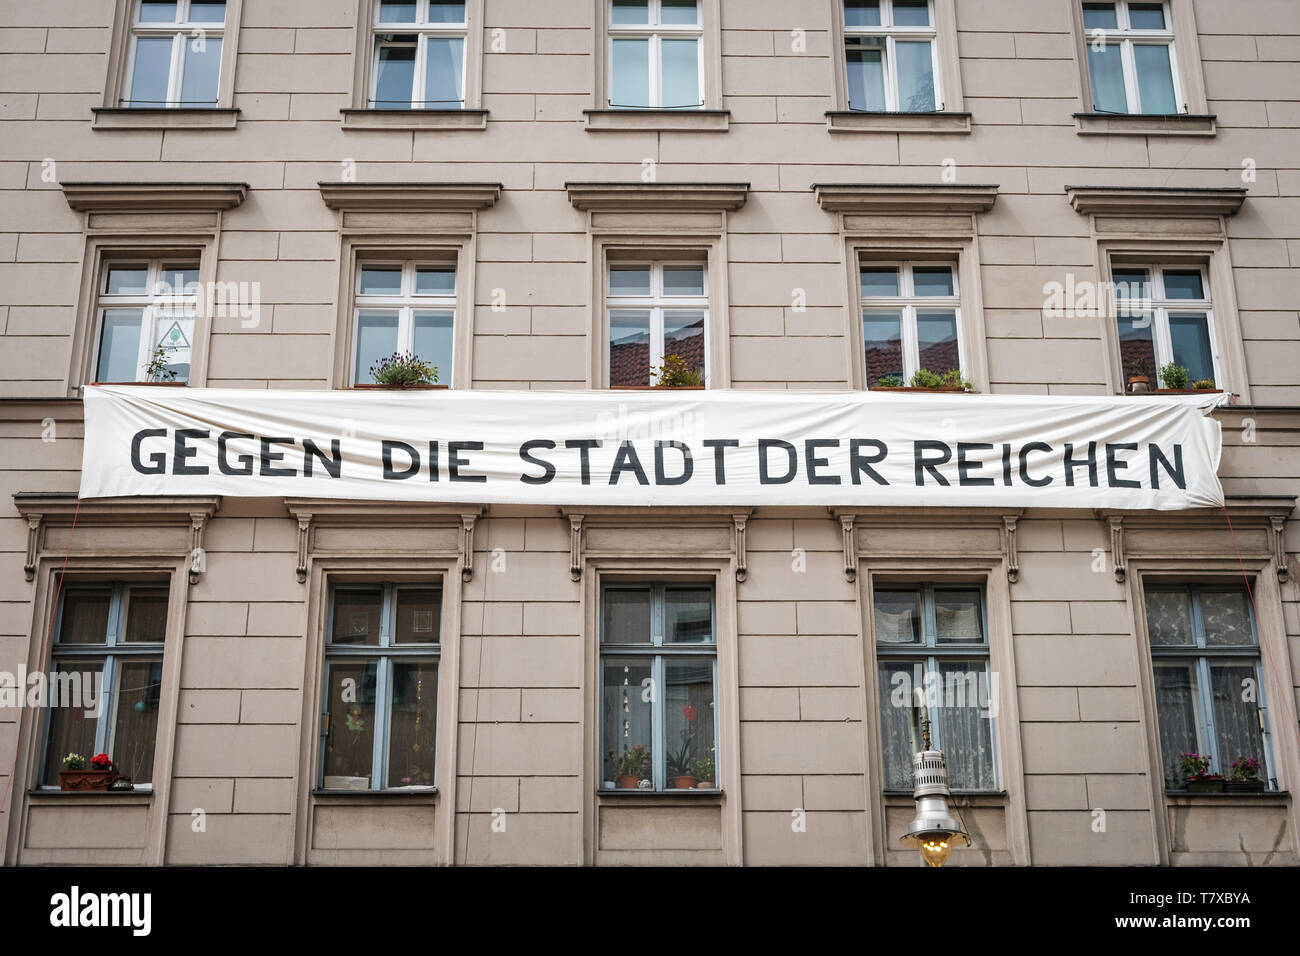 Berlin, Germany - May, 2019: Banner on house facade with political slogan against gentification in Berlin.  Against the City of the Rich (german: Gege Stock Photo